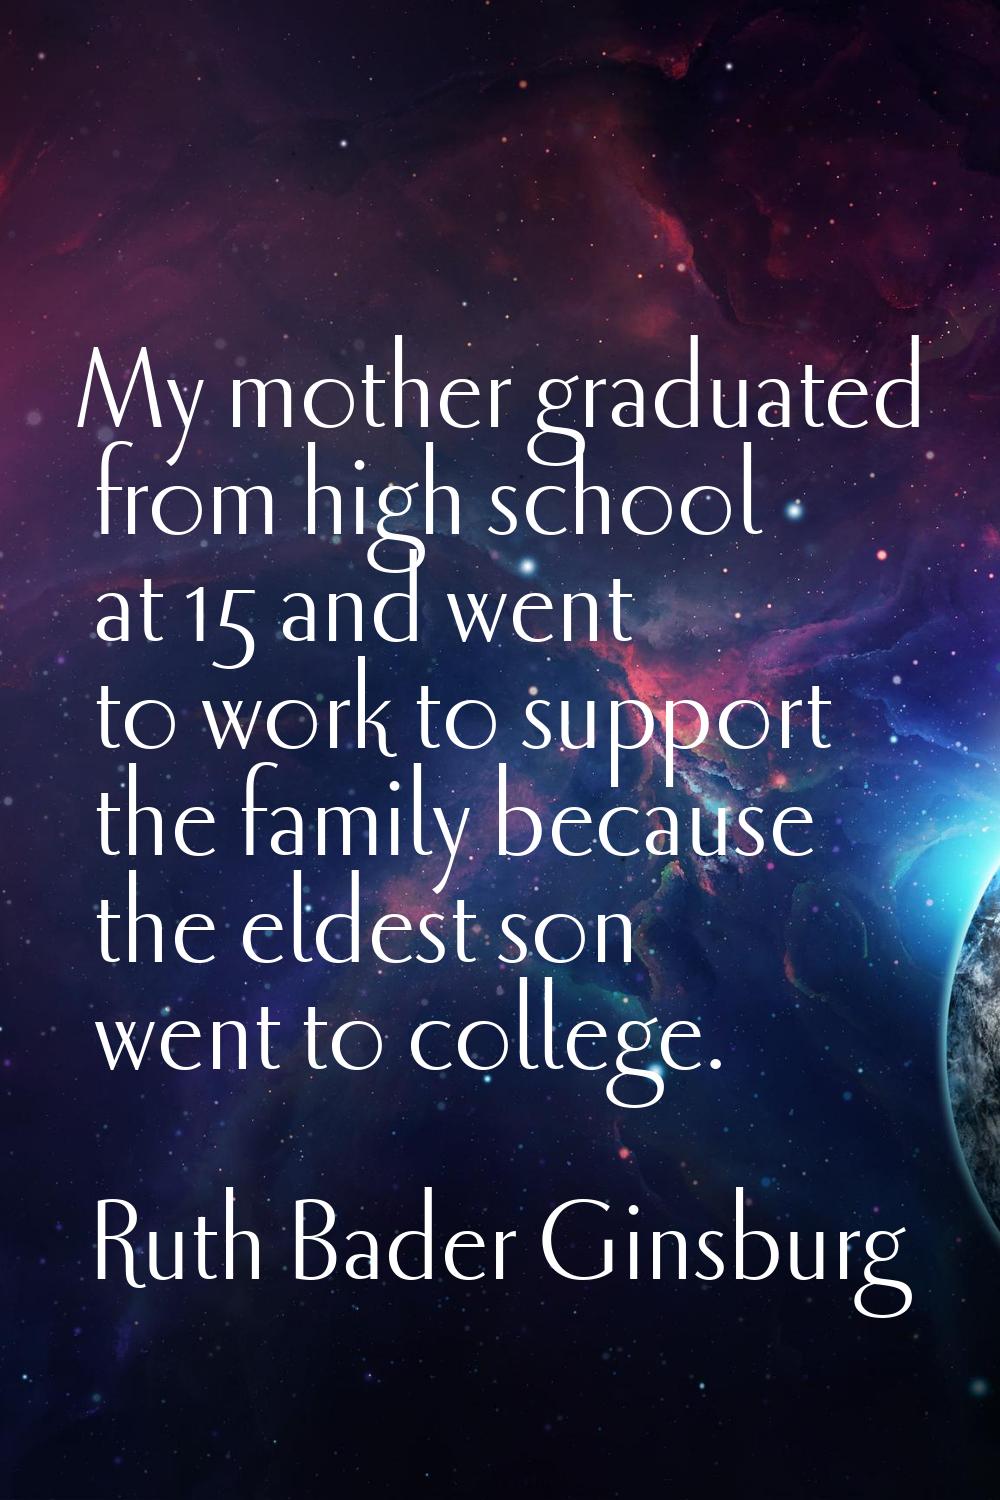 My mother graduated from high school at 15 and went to work to support the family because the eldes